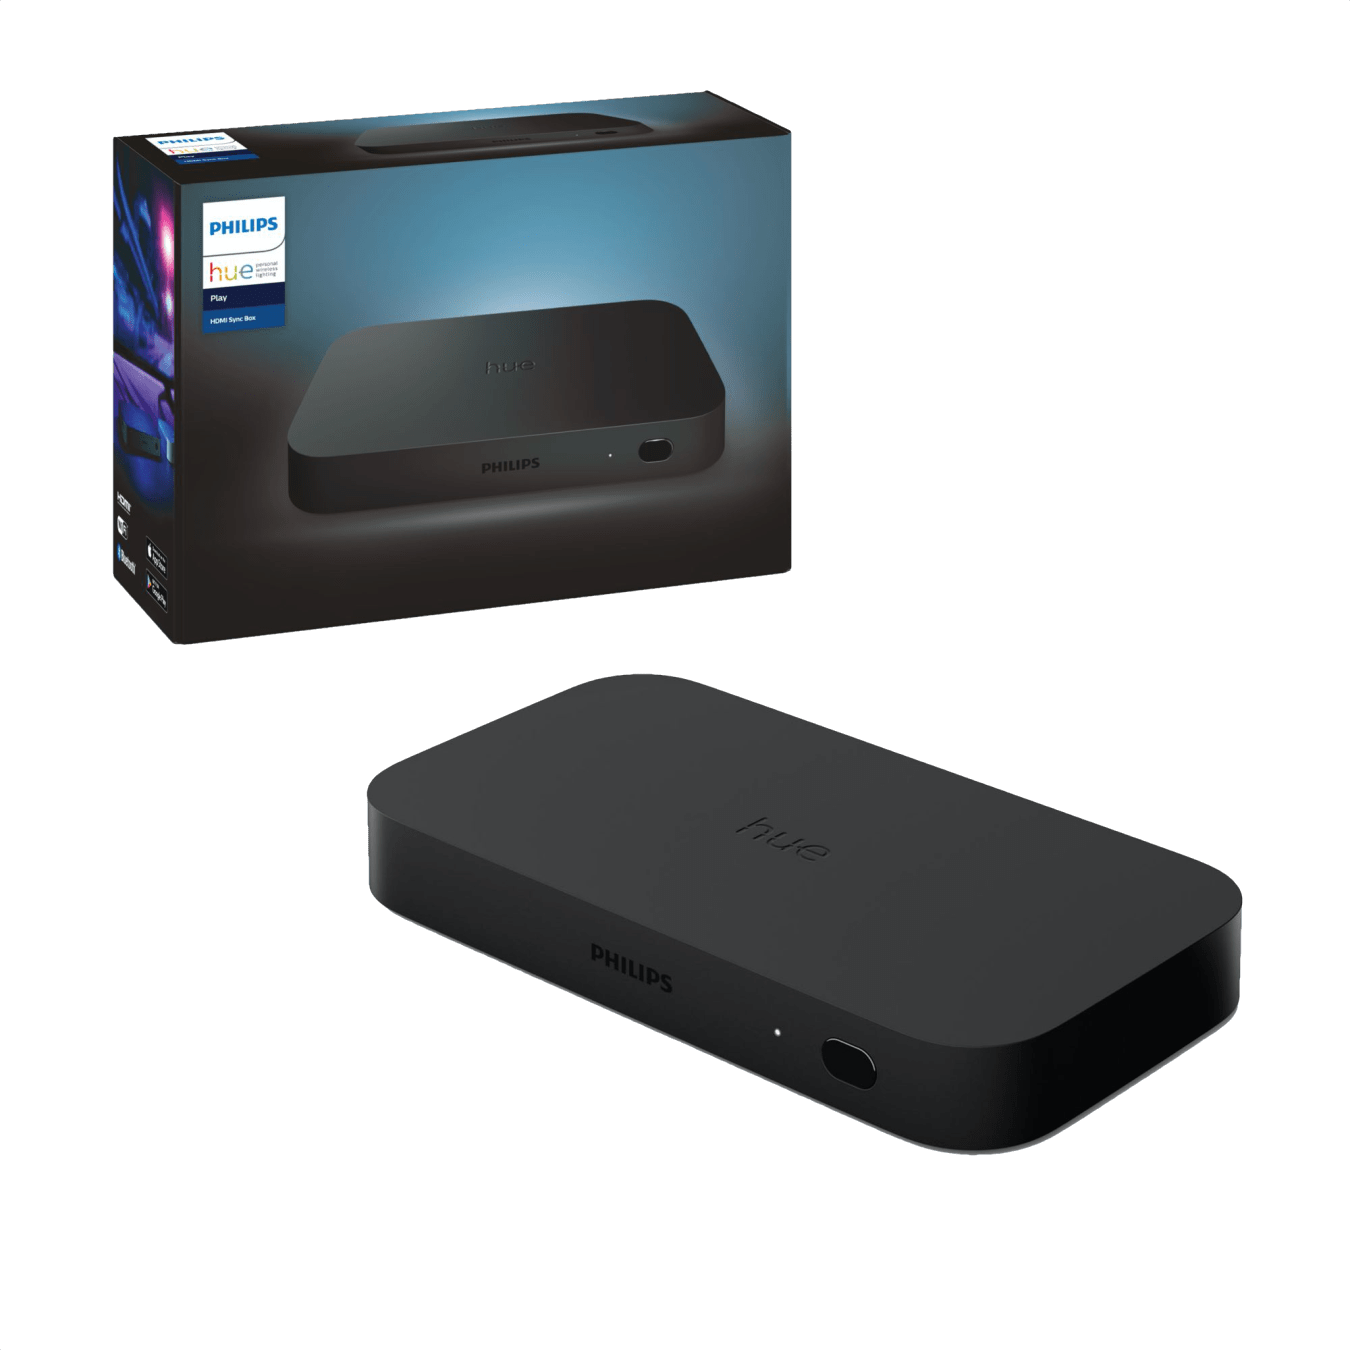 Philips Hue Play HDMI Sync Box Slimme verlichting Accessoire - incl. HDMI kabel